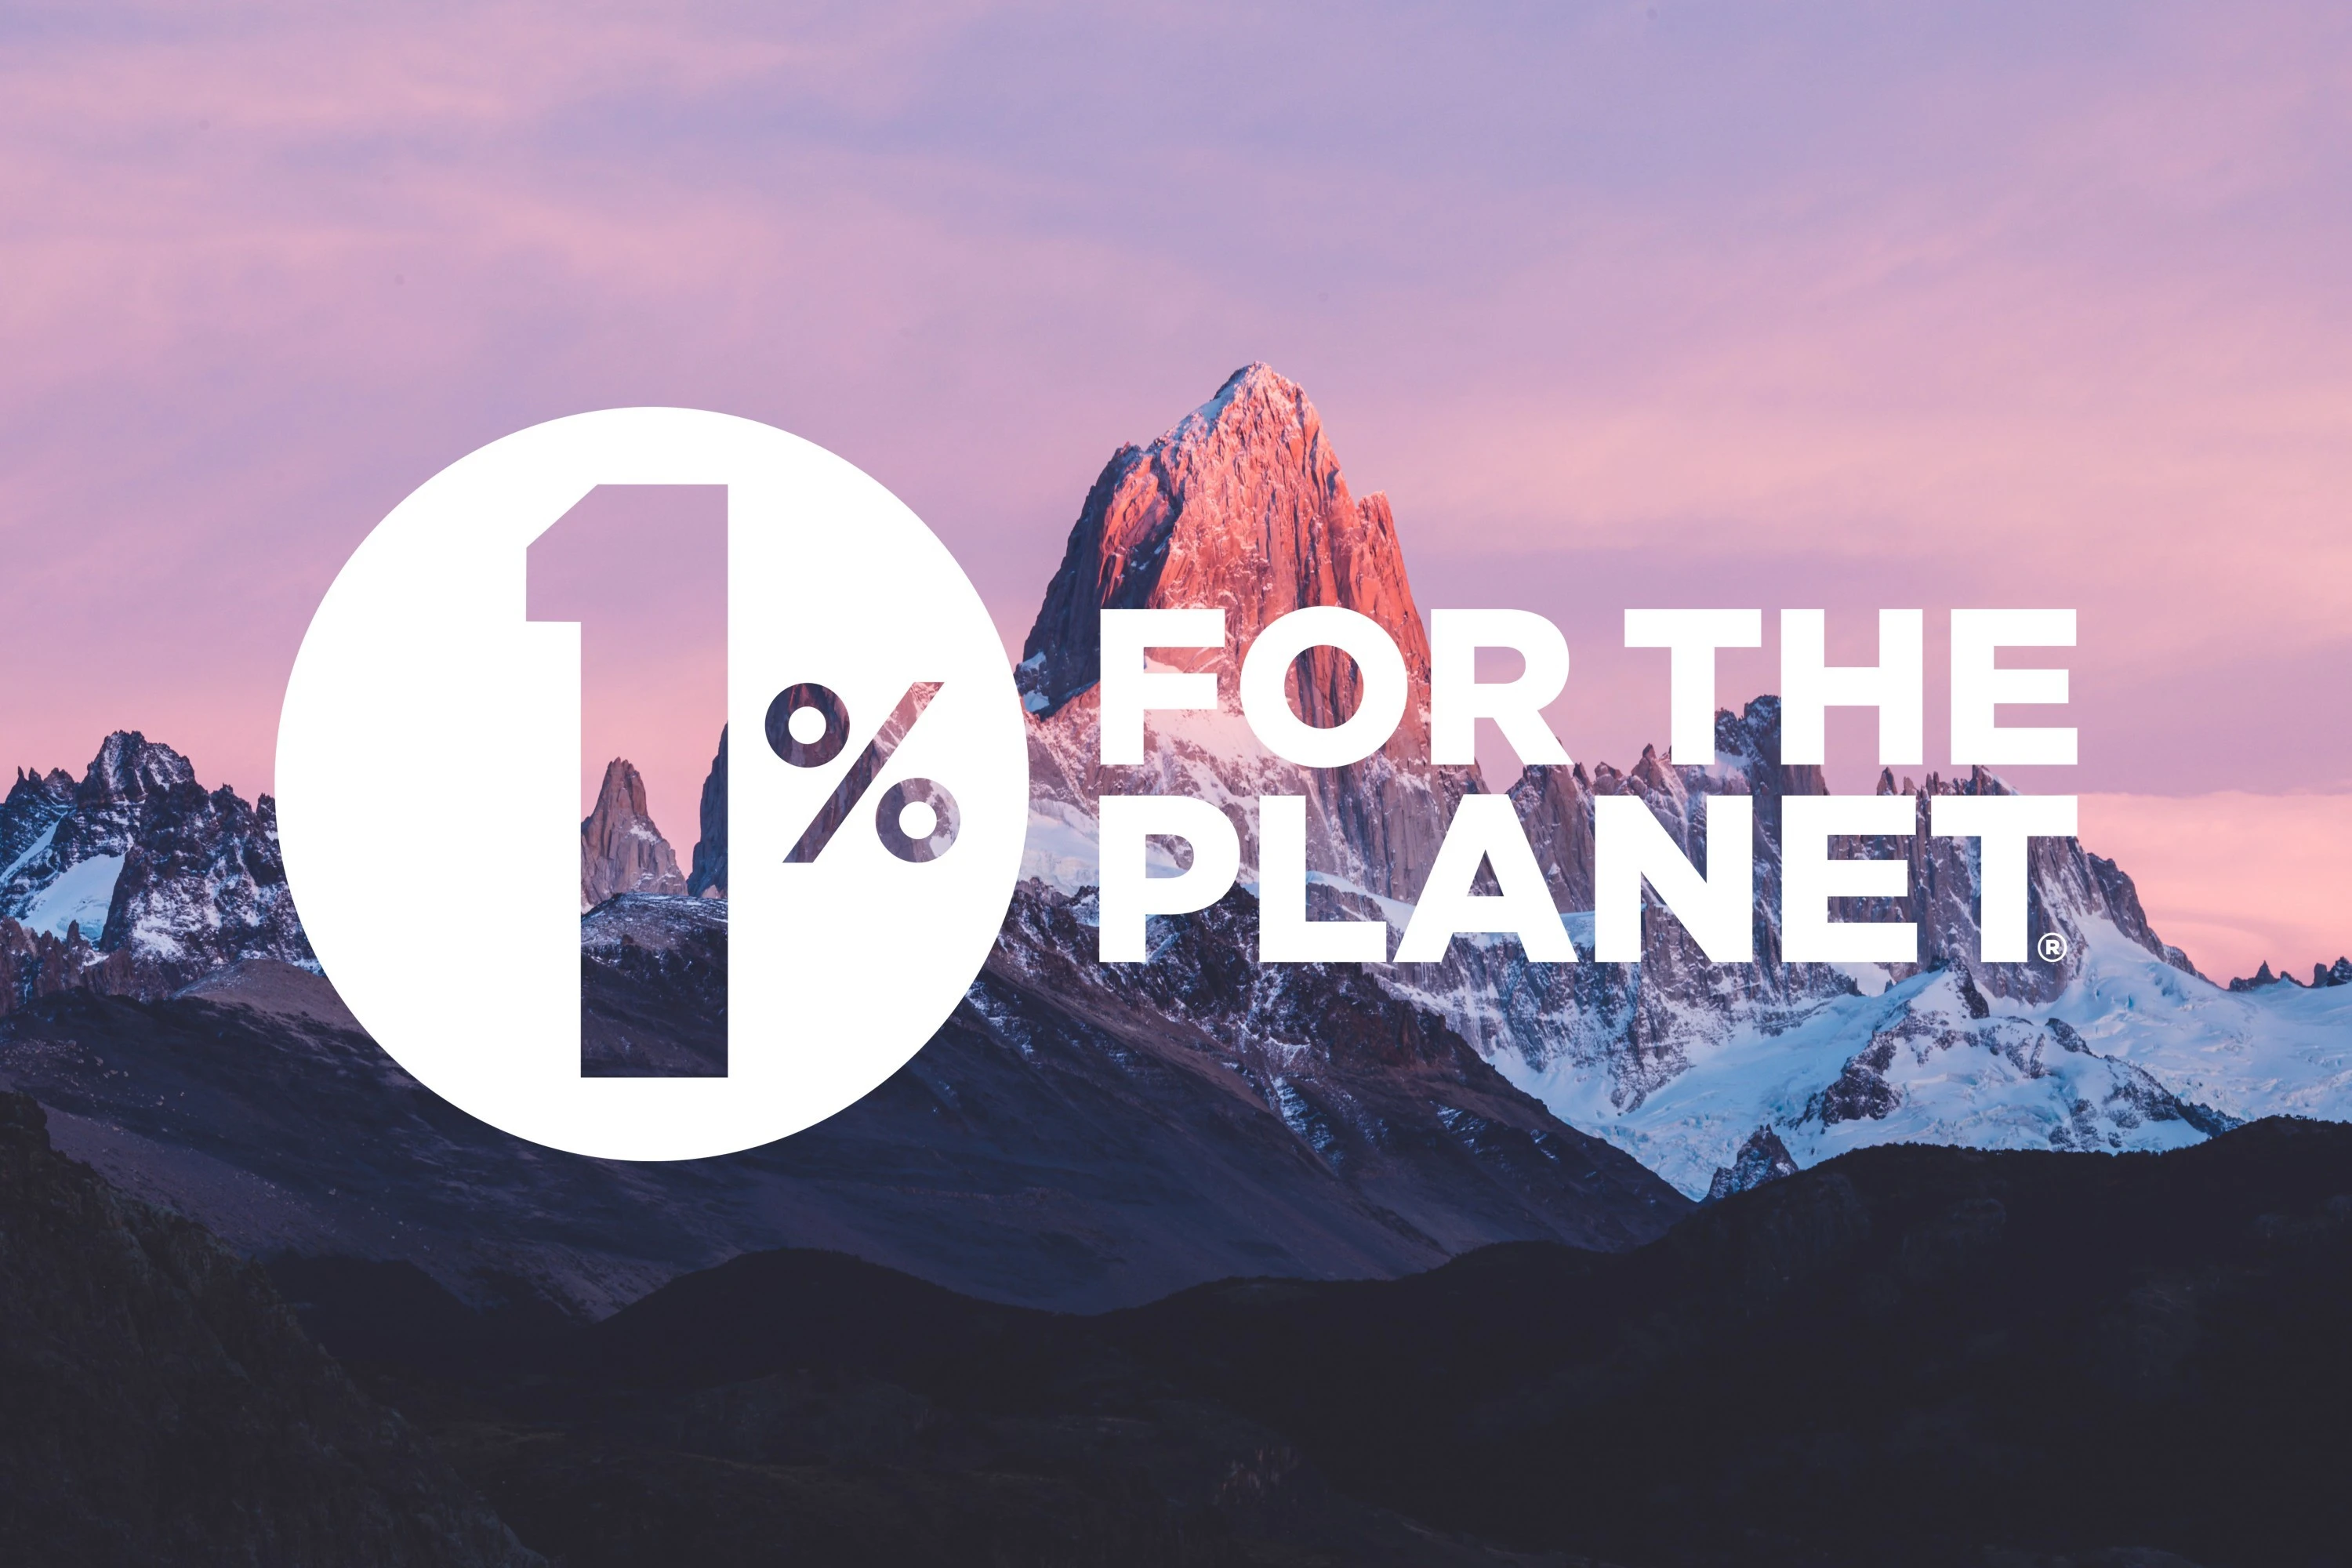 1% For the Planet | How Canadians Can Get Involved